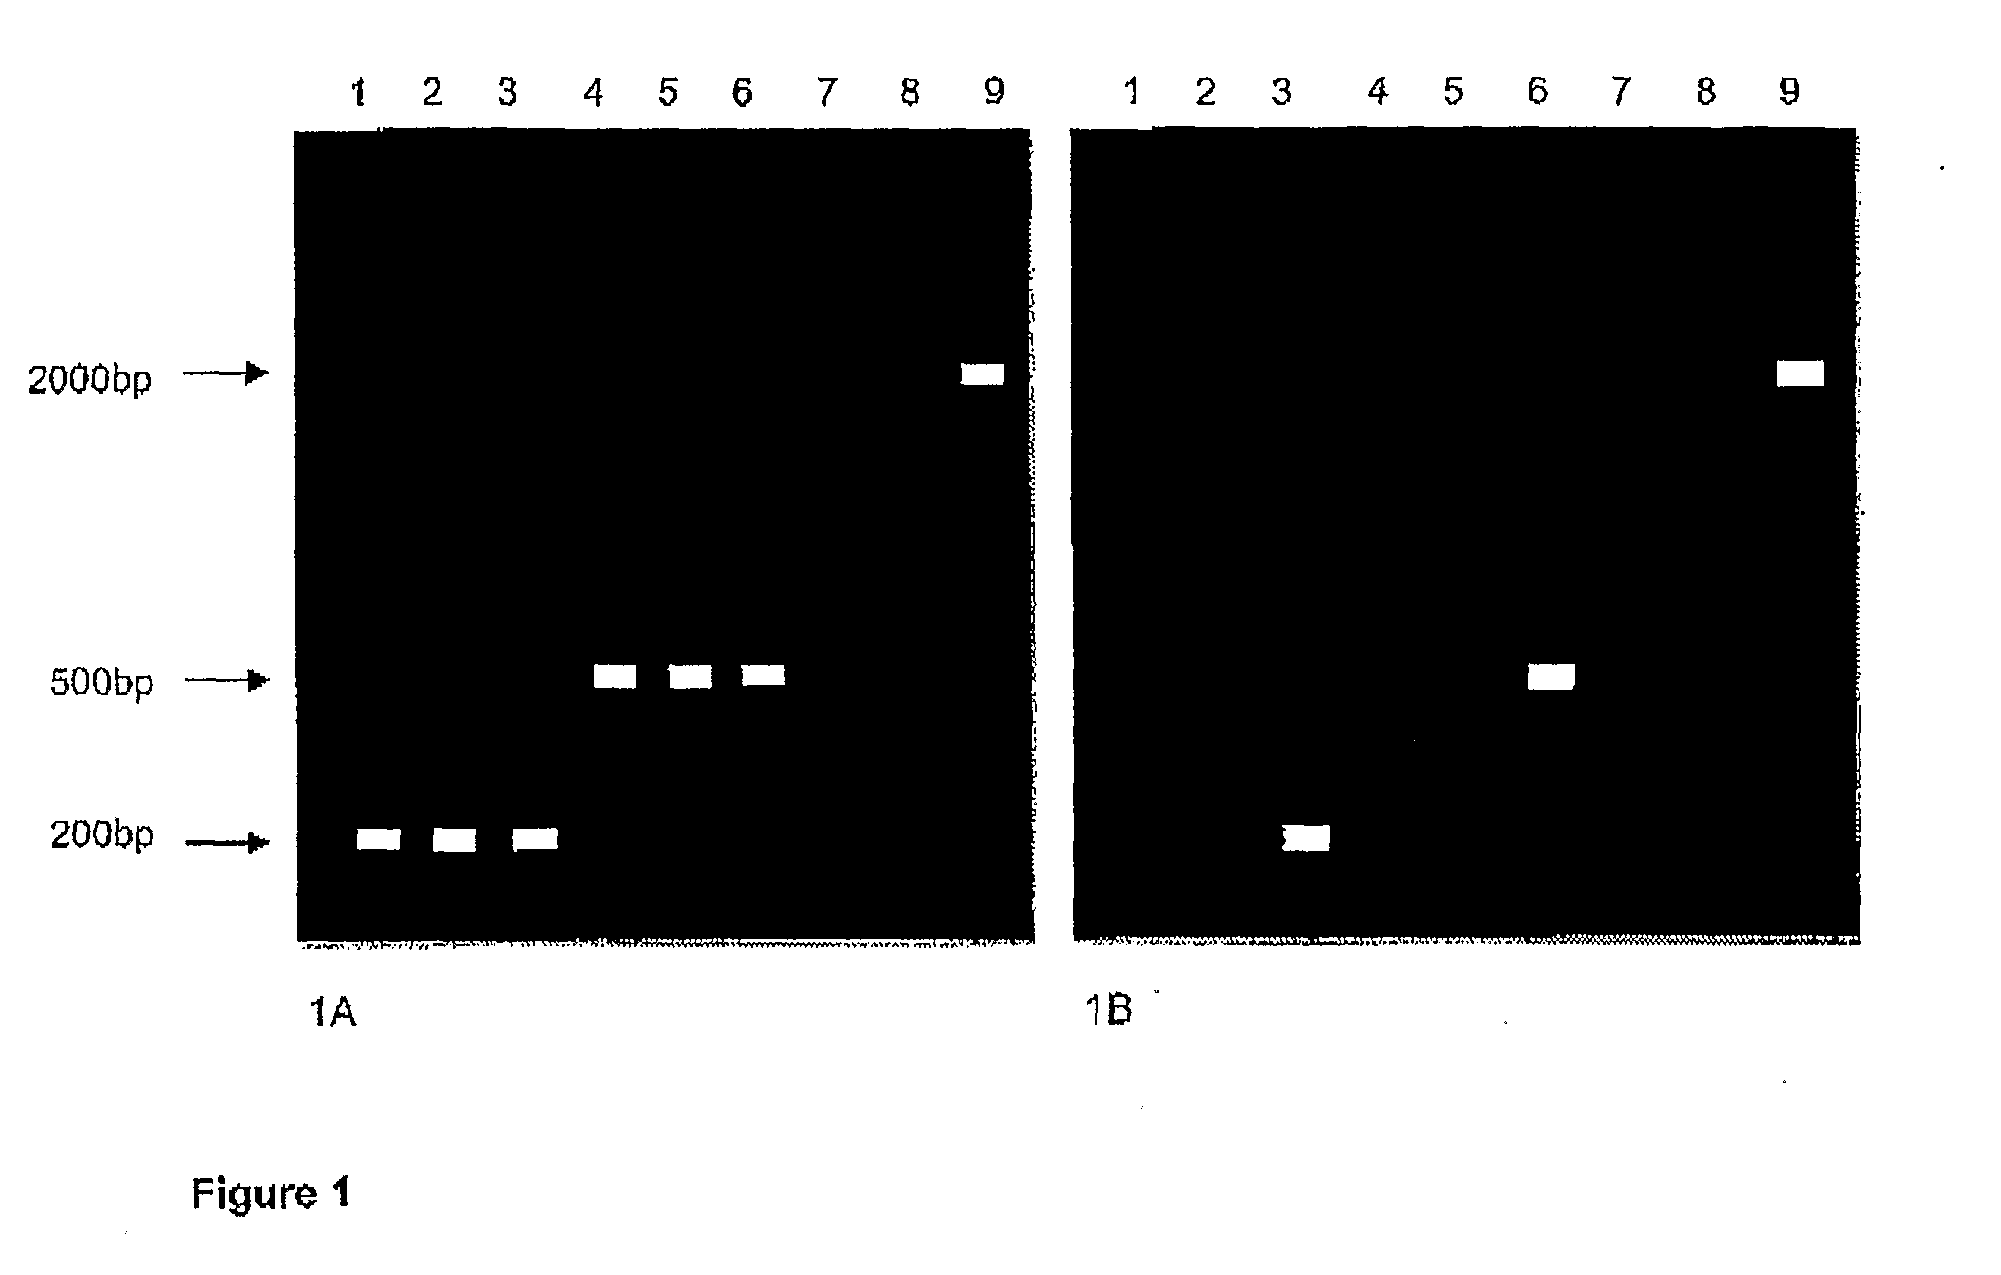 Enzymes for amplification and copying bisulphite modified nucleic acids